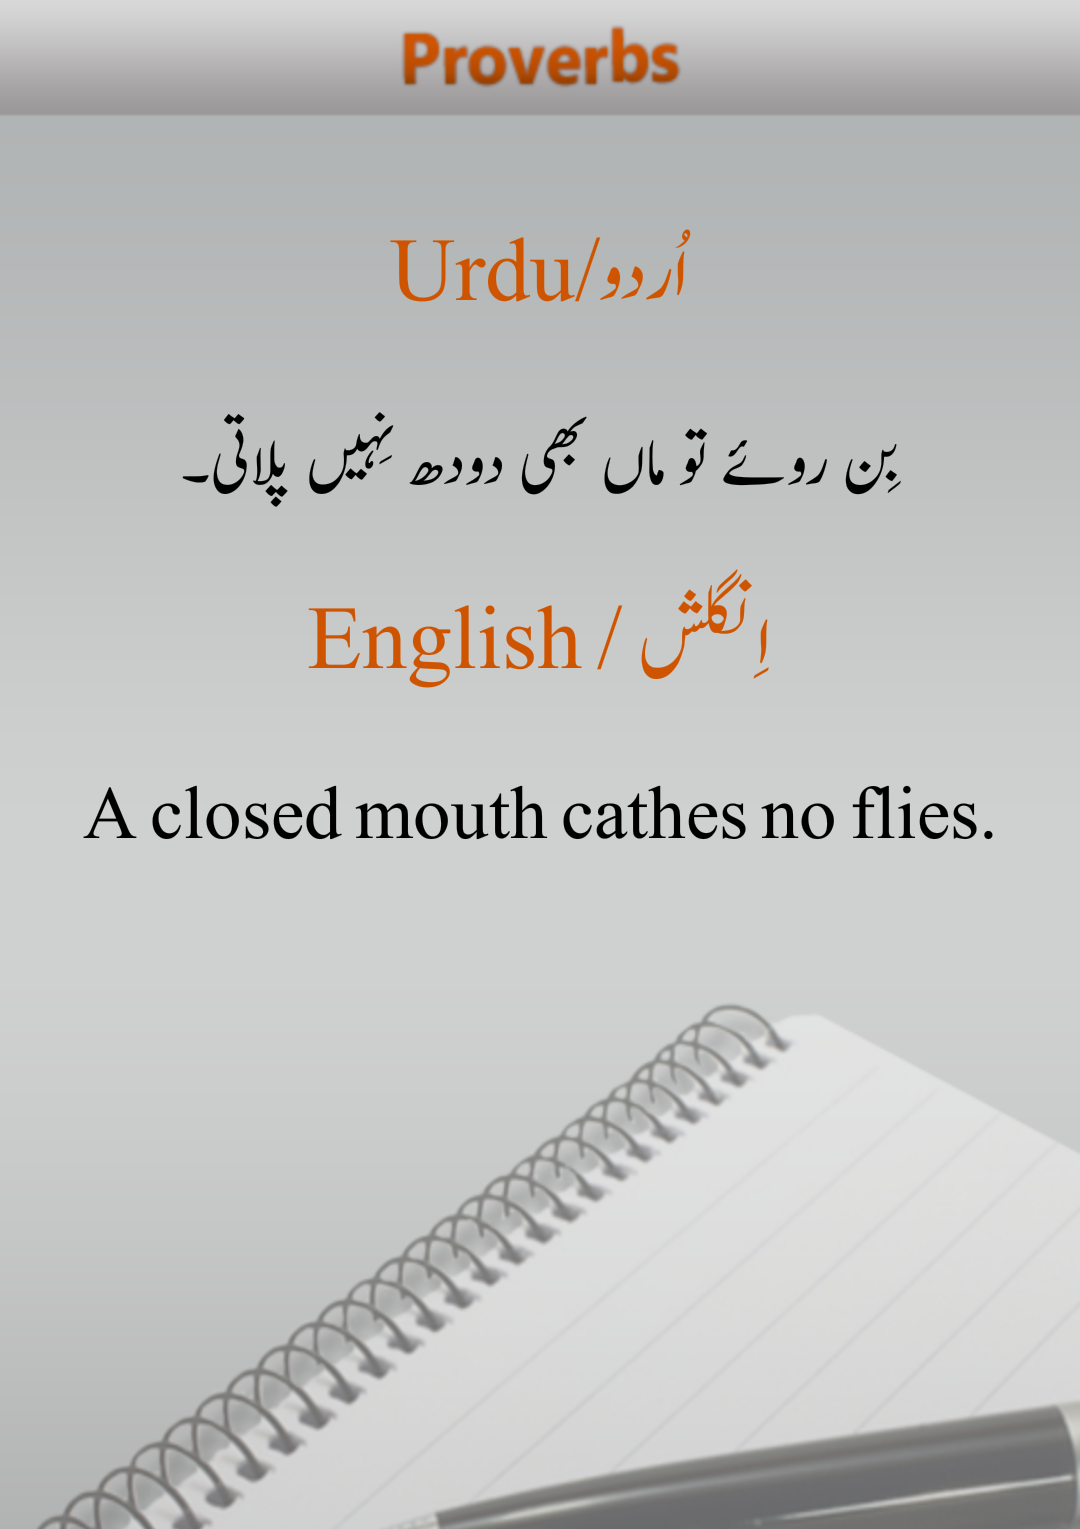 Clutching Meaning In Urdu, Chheen Lena چھین لینا